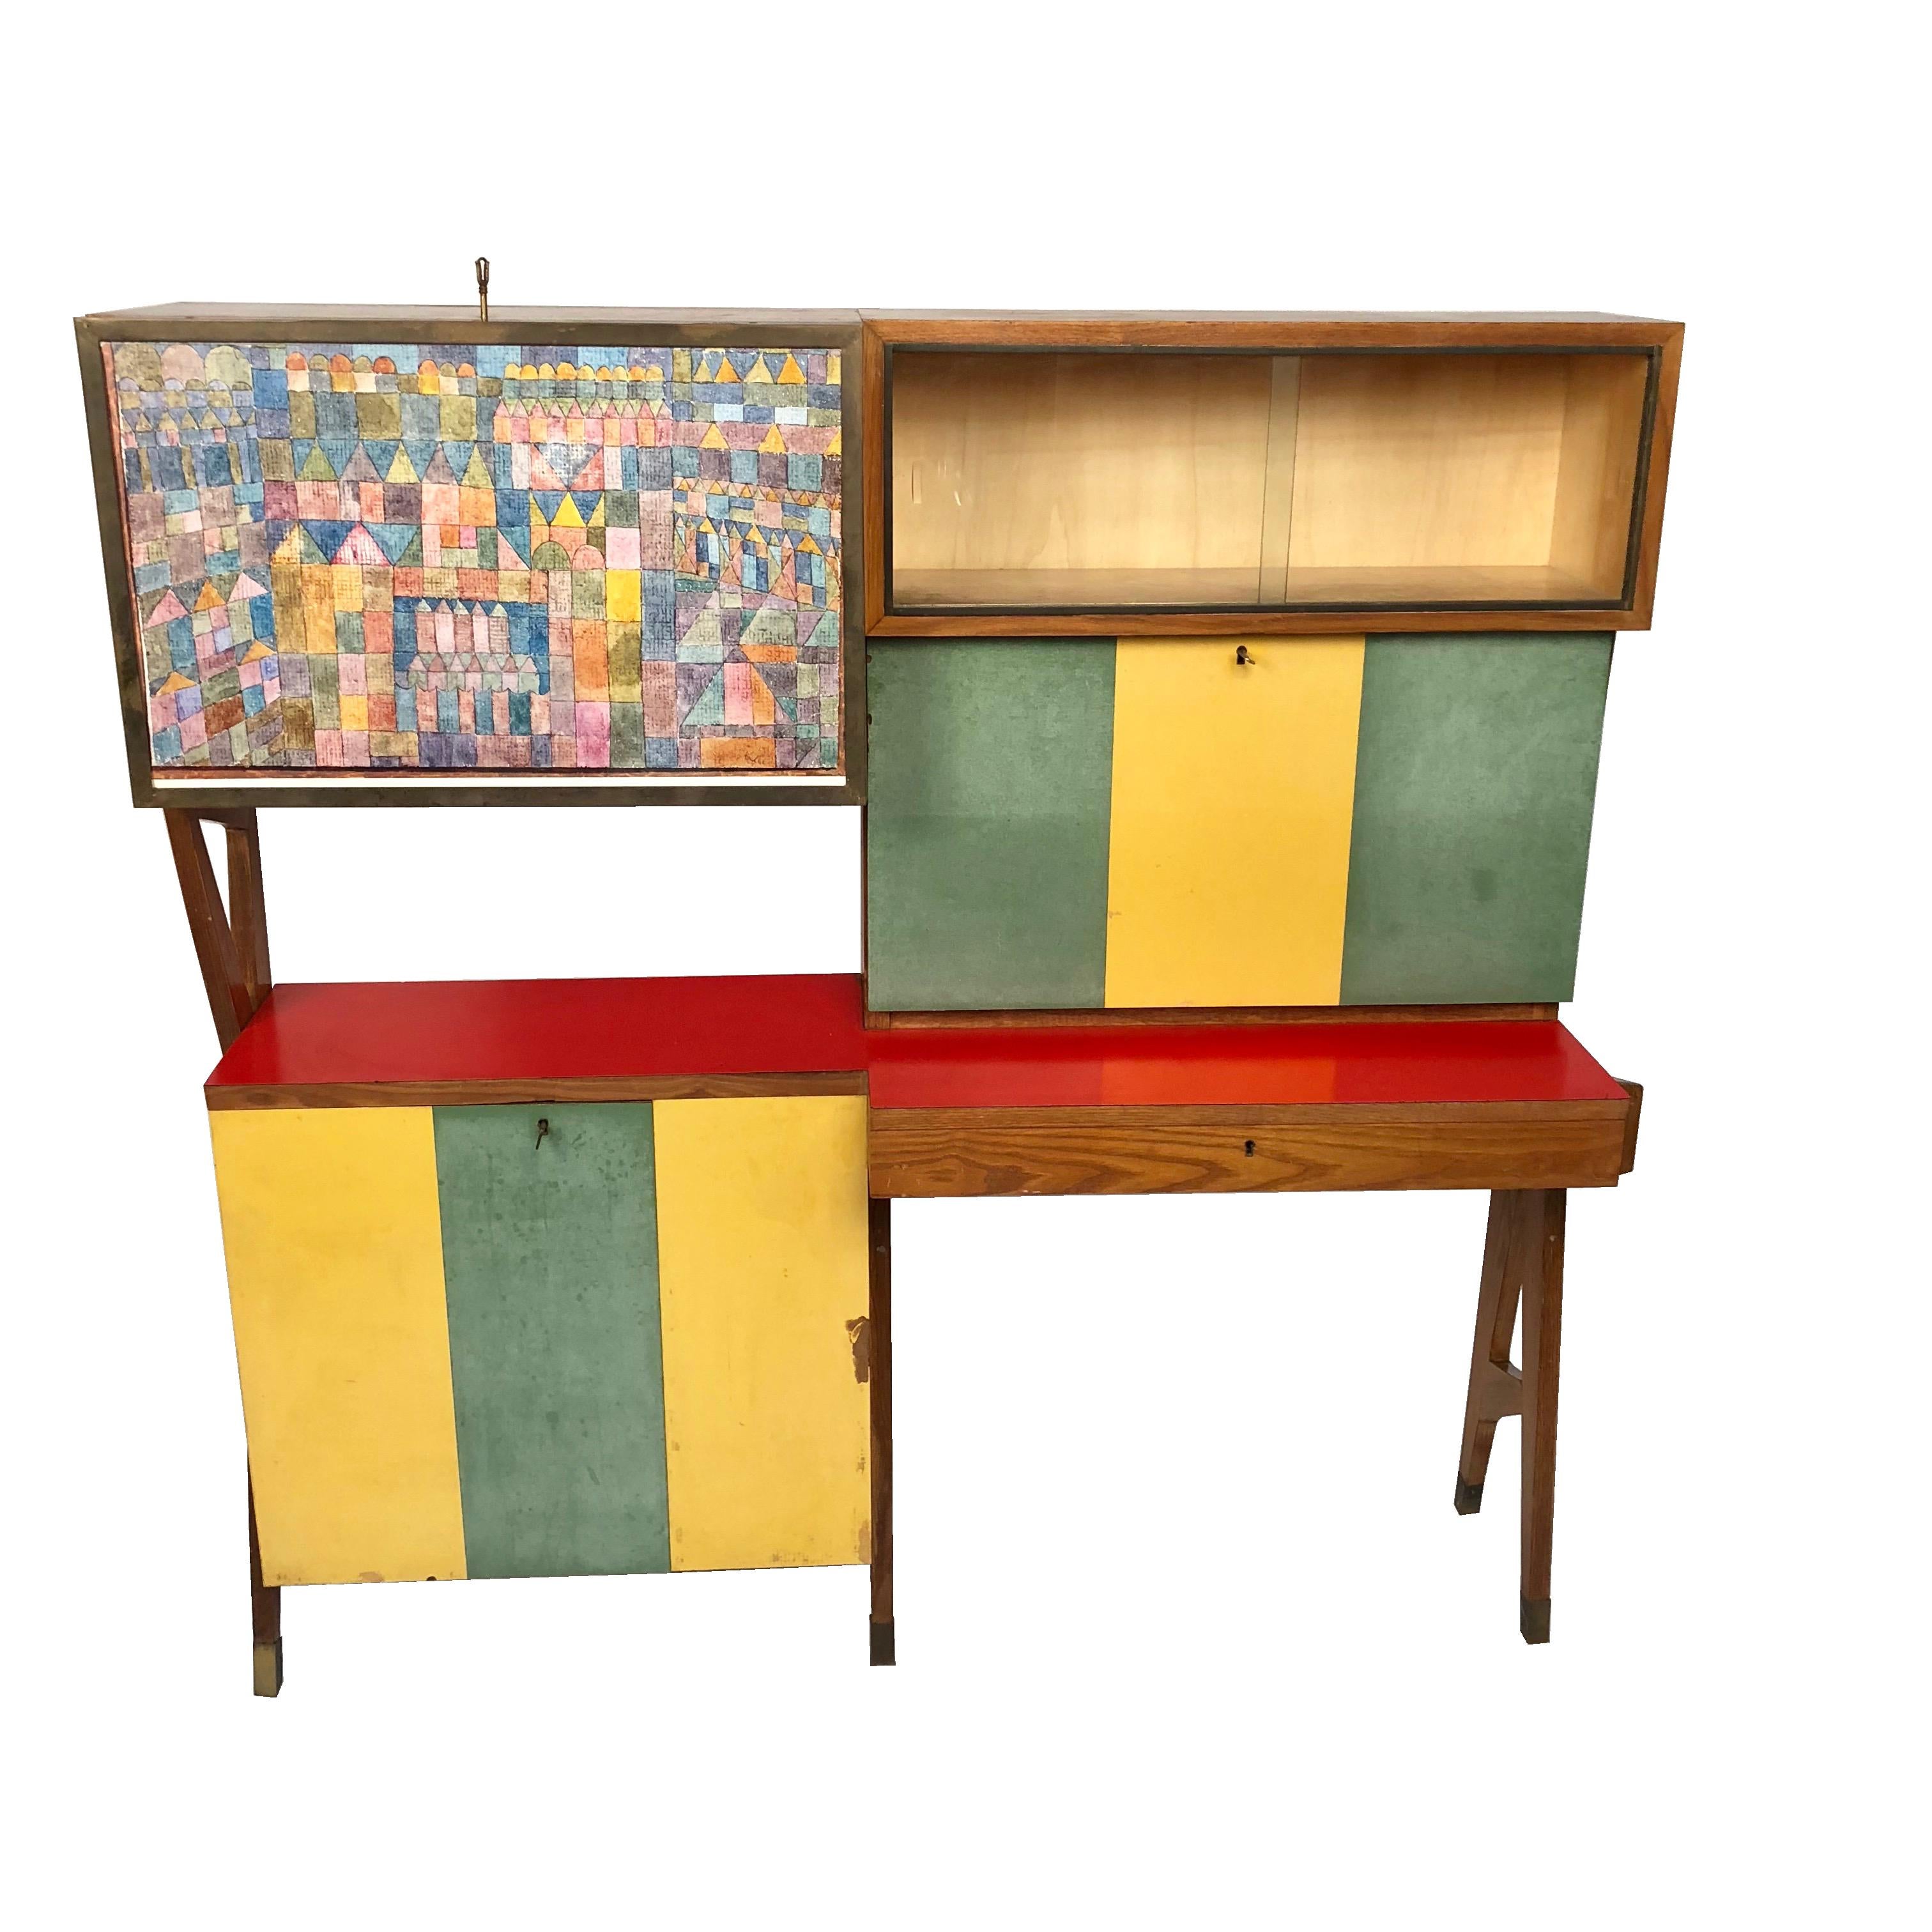 Rare Colored Italian Dry Bar Cabinet and Secretary Mid-Century Modern For Sale